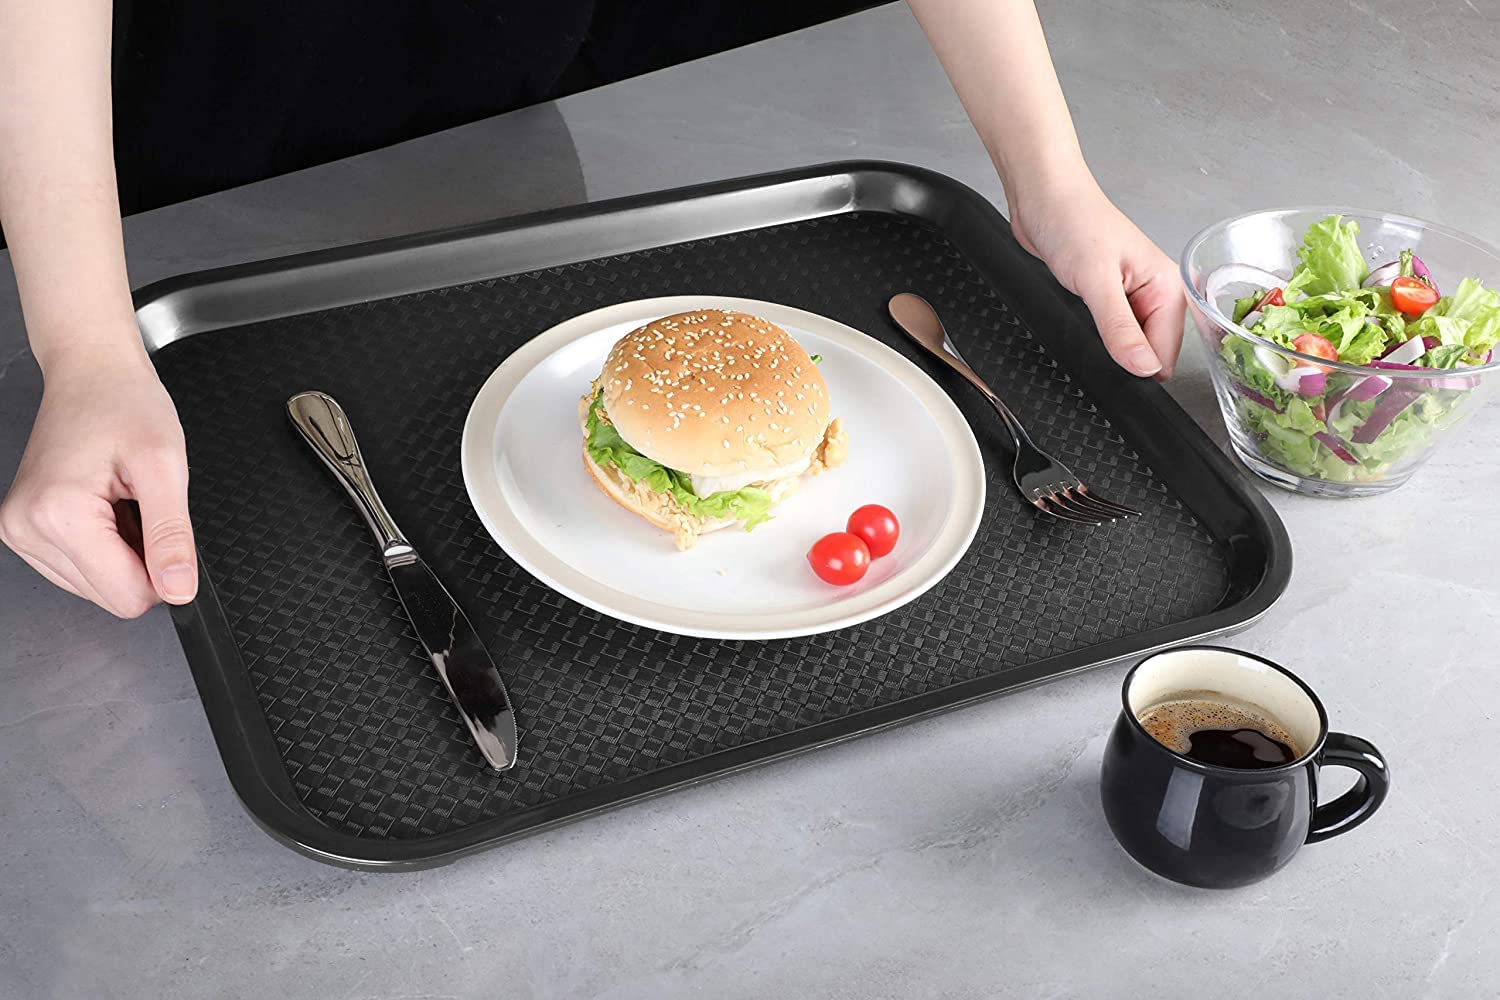 NJ Plastic Serving Platter Large Tray Unbreakable Snacks Tea Serving Tray Black Drink Breakfast Tea Dinner Coffee Salad Food for Dinning Table Home Kitchen (16 X 12 Inches) : 1 Pc.